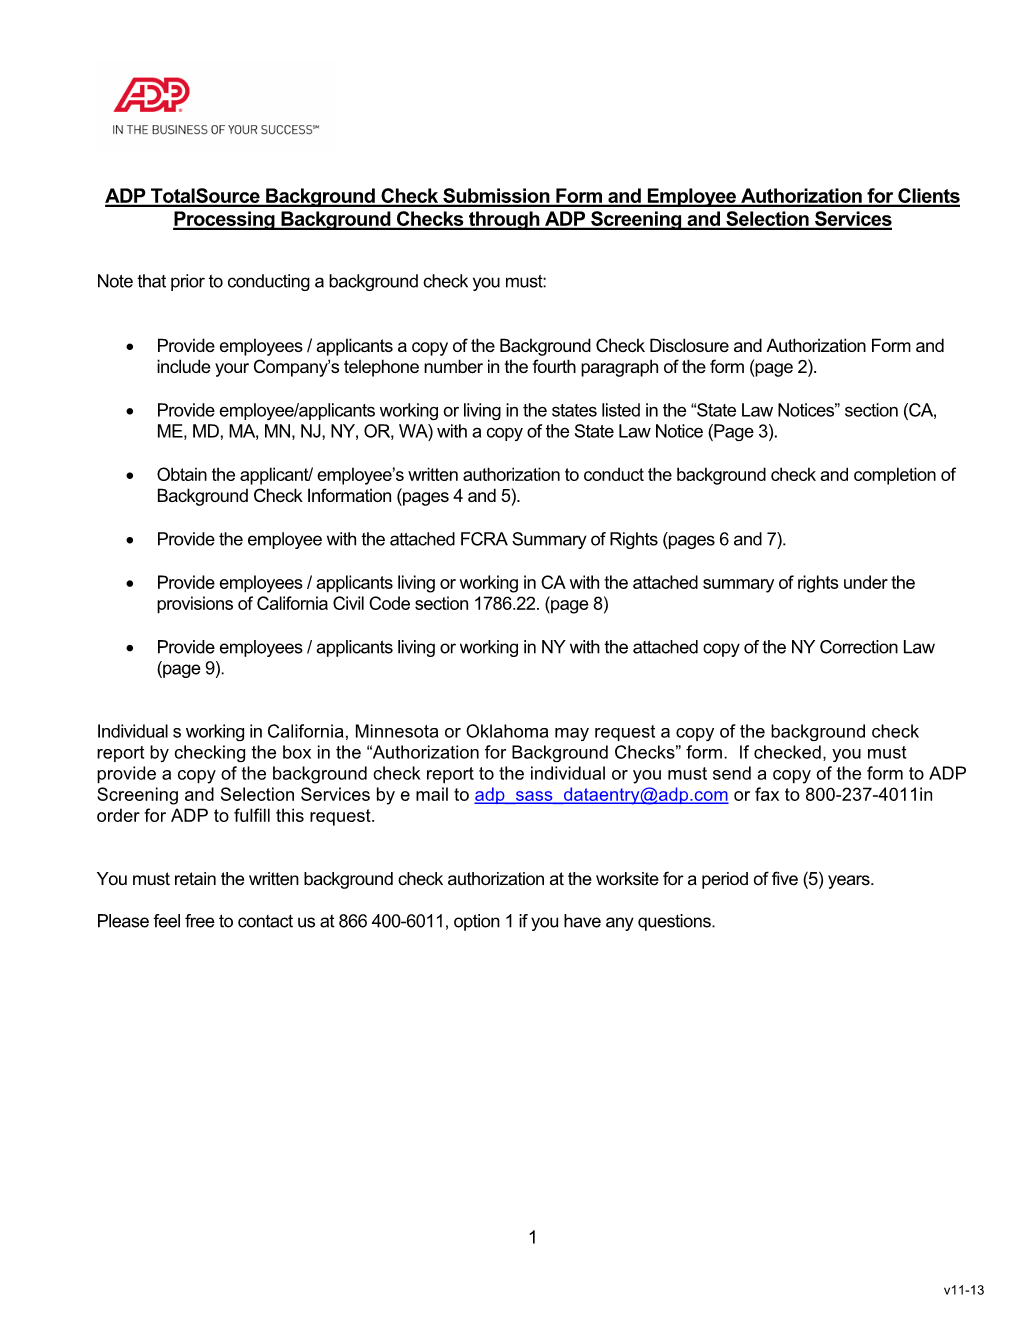 ADP Totalsource Background Check Submission Form and Employee Authorization for Clients Processing Background Checks Through ADP Screening and Selection Services